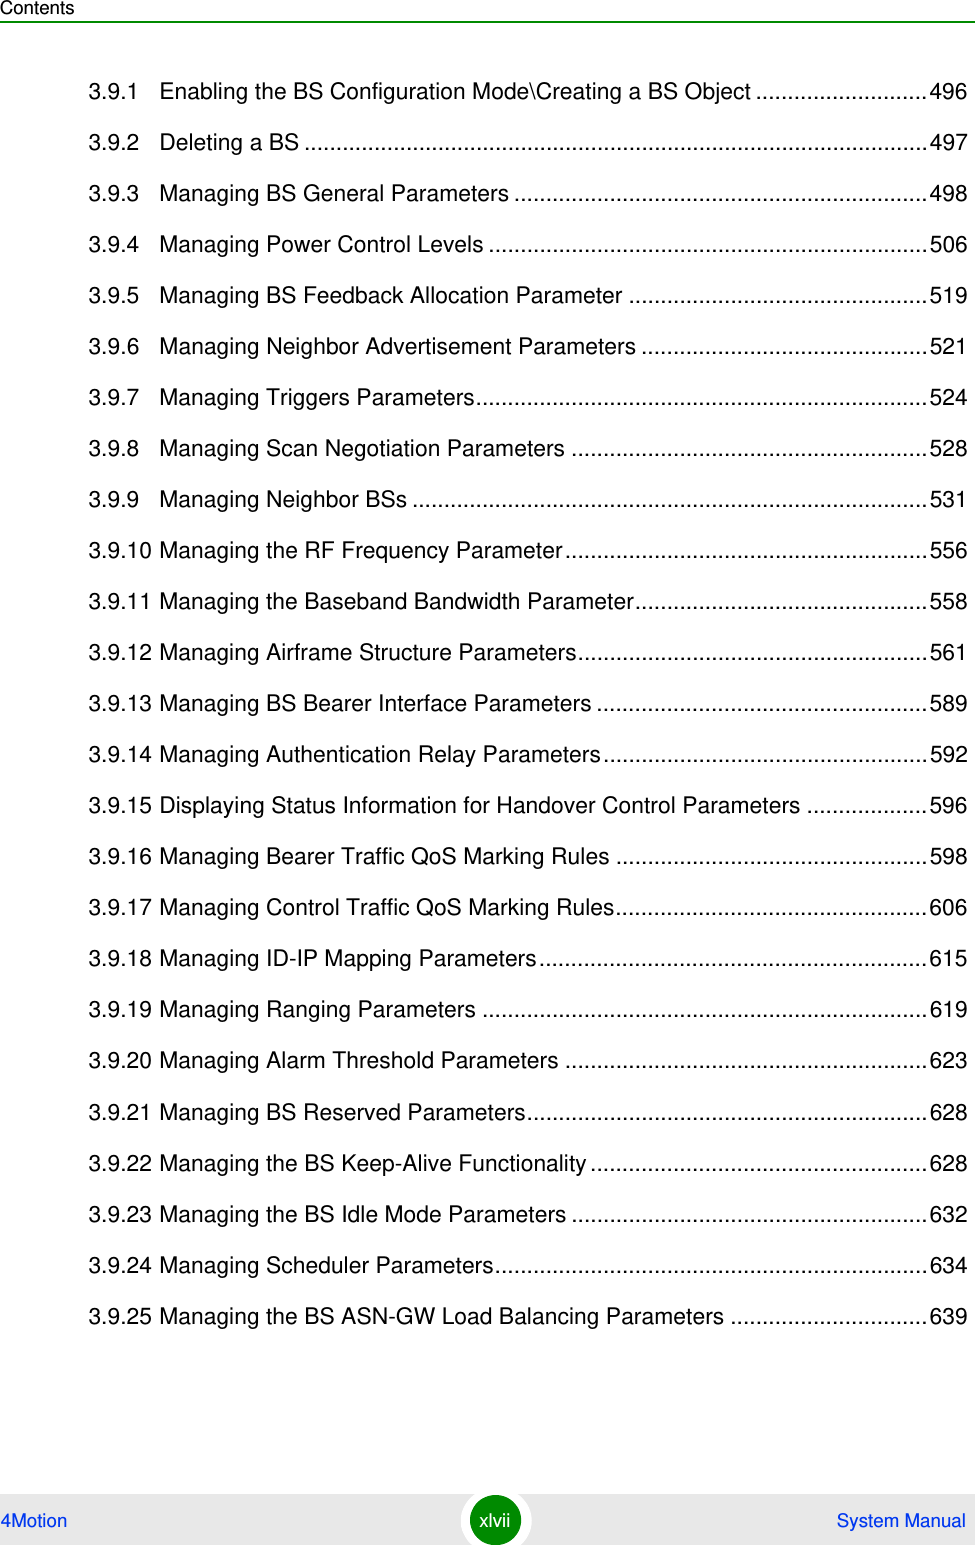 Contents4Motion xlvii  System Manual3.9.1 Enabling the BS Configuration Mode\Creating a BS Object ...........................4963.9.2 Deleting a BS ..................................................................................................4973.9.3 Managing BS General Parameters .................................................................4983.9.4 Managing Power Control Levels .....................................................................5063.9.5 Managing BS Feedback Allocation Parameter ...............................................5193.9.6 Managing Neighbor Advertisement Parameters .............................................5213.9.7 Managing Triggers Parameters.......................................................................5243.9.8 Managing Scan Negotiation Parameters ........................................................5283.9.9 Managing Neighbor BSs .................................................................................5313.9.10 Managing the RF Frequency Parameter.........................................................5563.9.11 Managing the Baseband Bandwidth Parameter..............................................5583.9.12 Managing Airframe Structure Parameters.......................................................5613.9.13 Managing BS Bearer Interface Parameters ....................................................5893.9.14 Managing Authentication Relay Parameters...................................................5923.9.15 Displaying Status Information for Handover Control Parameters ...................5963.9.16 Managing Bearer Traffic QoS Marking Rules .................................................5983.9.17 Managing Control Traffic QoS Marking Rules.................................................6063.9.18 Managing ID-IP Mapping Parameters.............................................................6153.9.19 Managing Ranging Parameters ......................................................................6193.9.20 Managing Alarm Threshold Parameters .........................................................6233.9.21 Managing BS Reserved Parameters...............................................................6283.9.22 Managing the BS Keep-Alive Functionality .....................................................6283.9.23 Managing the BS Idle Mode Parameters ........................................................6323.9.24 Managing Scheduler Parameters....................................................................6343.9.25 Managing the BS ASN-GW Load Balancing Parameters ...............................639